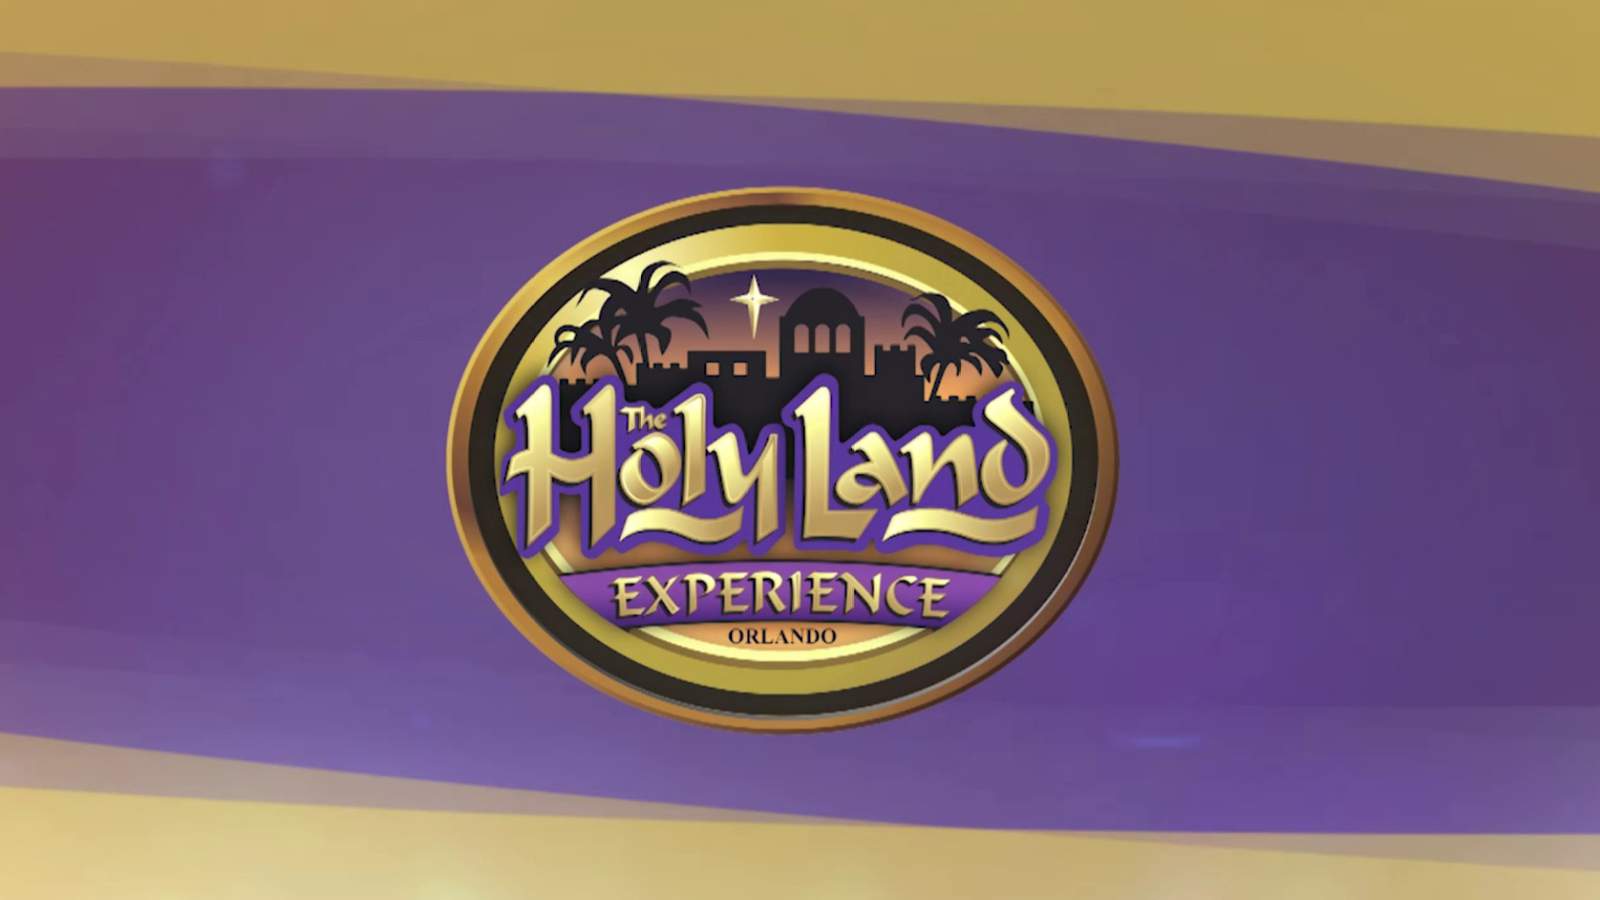 What's new at the Holy Land Experience?